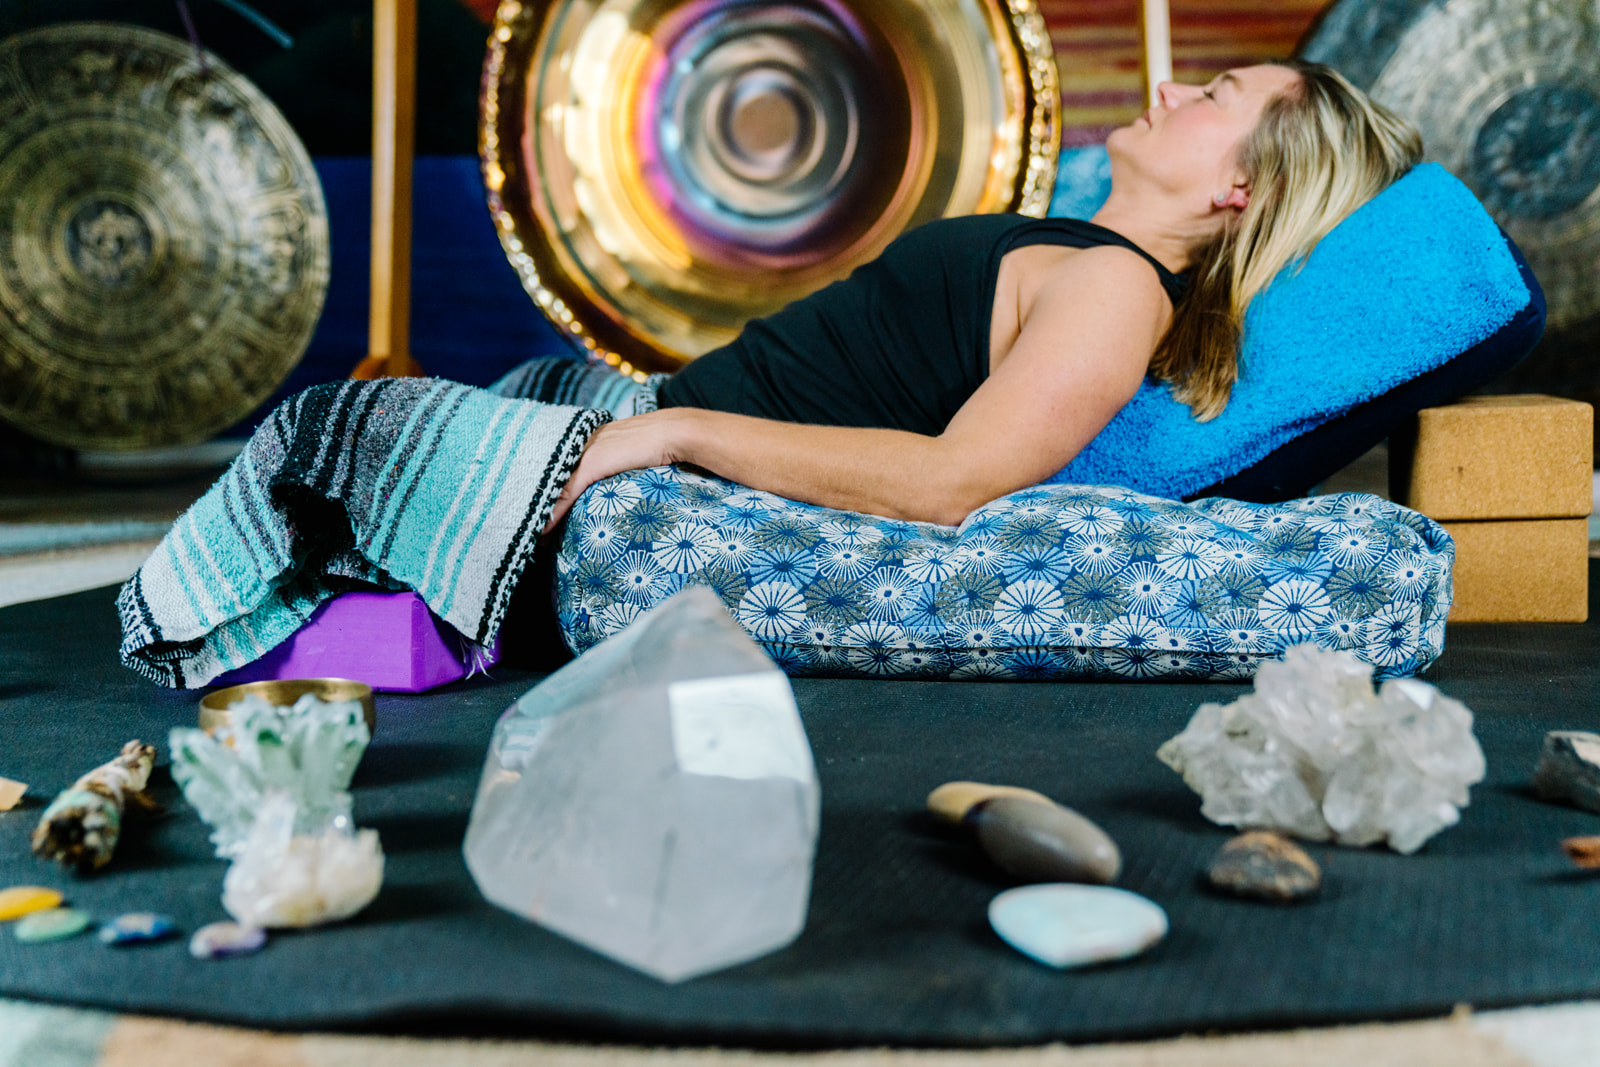 Lady lying in yoga pose relaxed with crystals